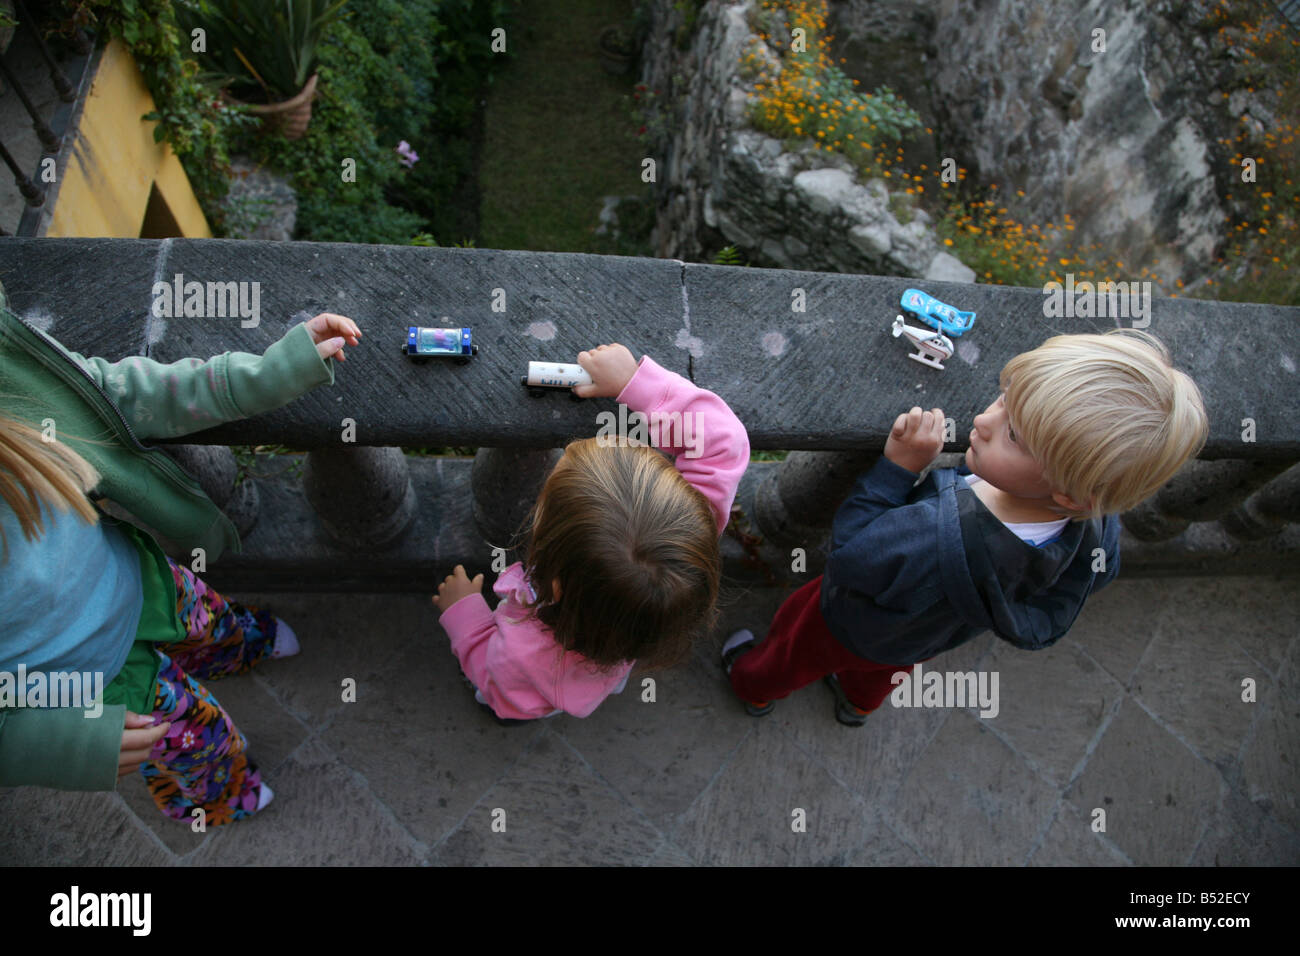 Children playing outside with toy cars on an old stone balcony. Little boy listens attentively to older girl explain the rules Stock Photo